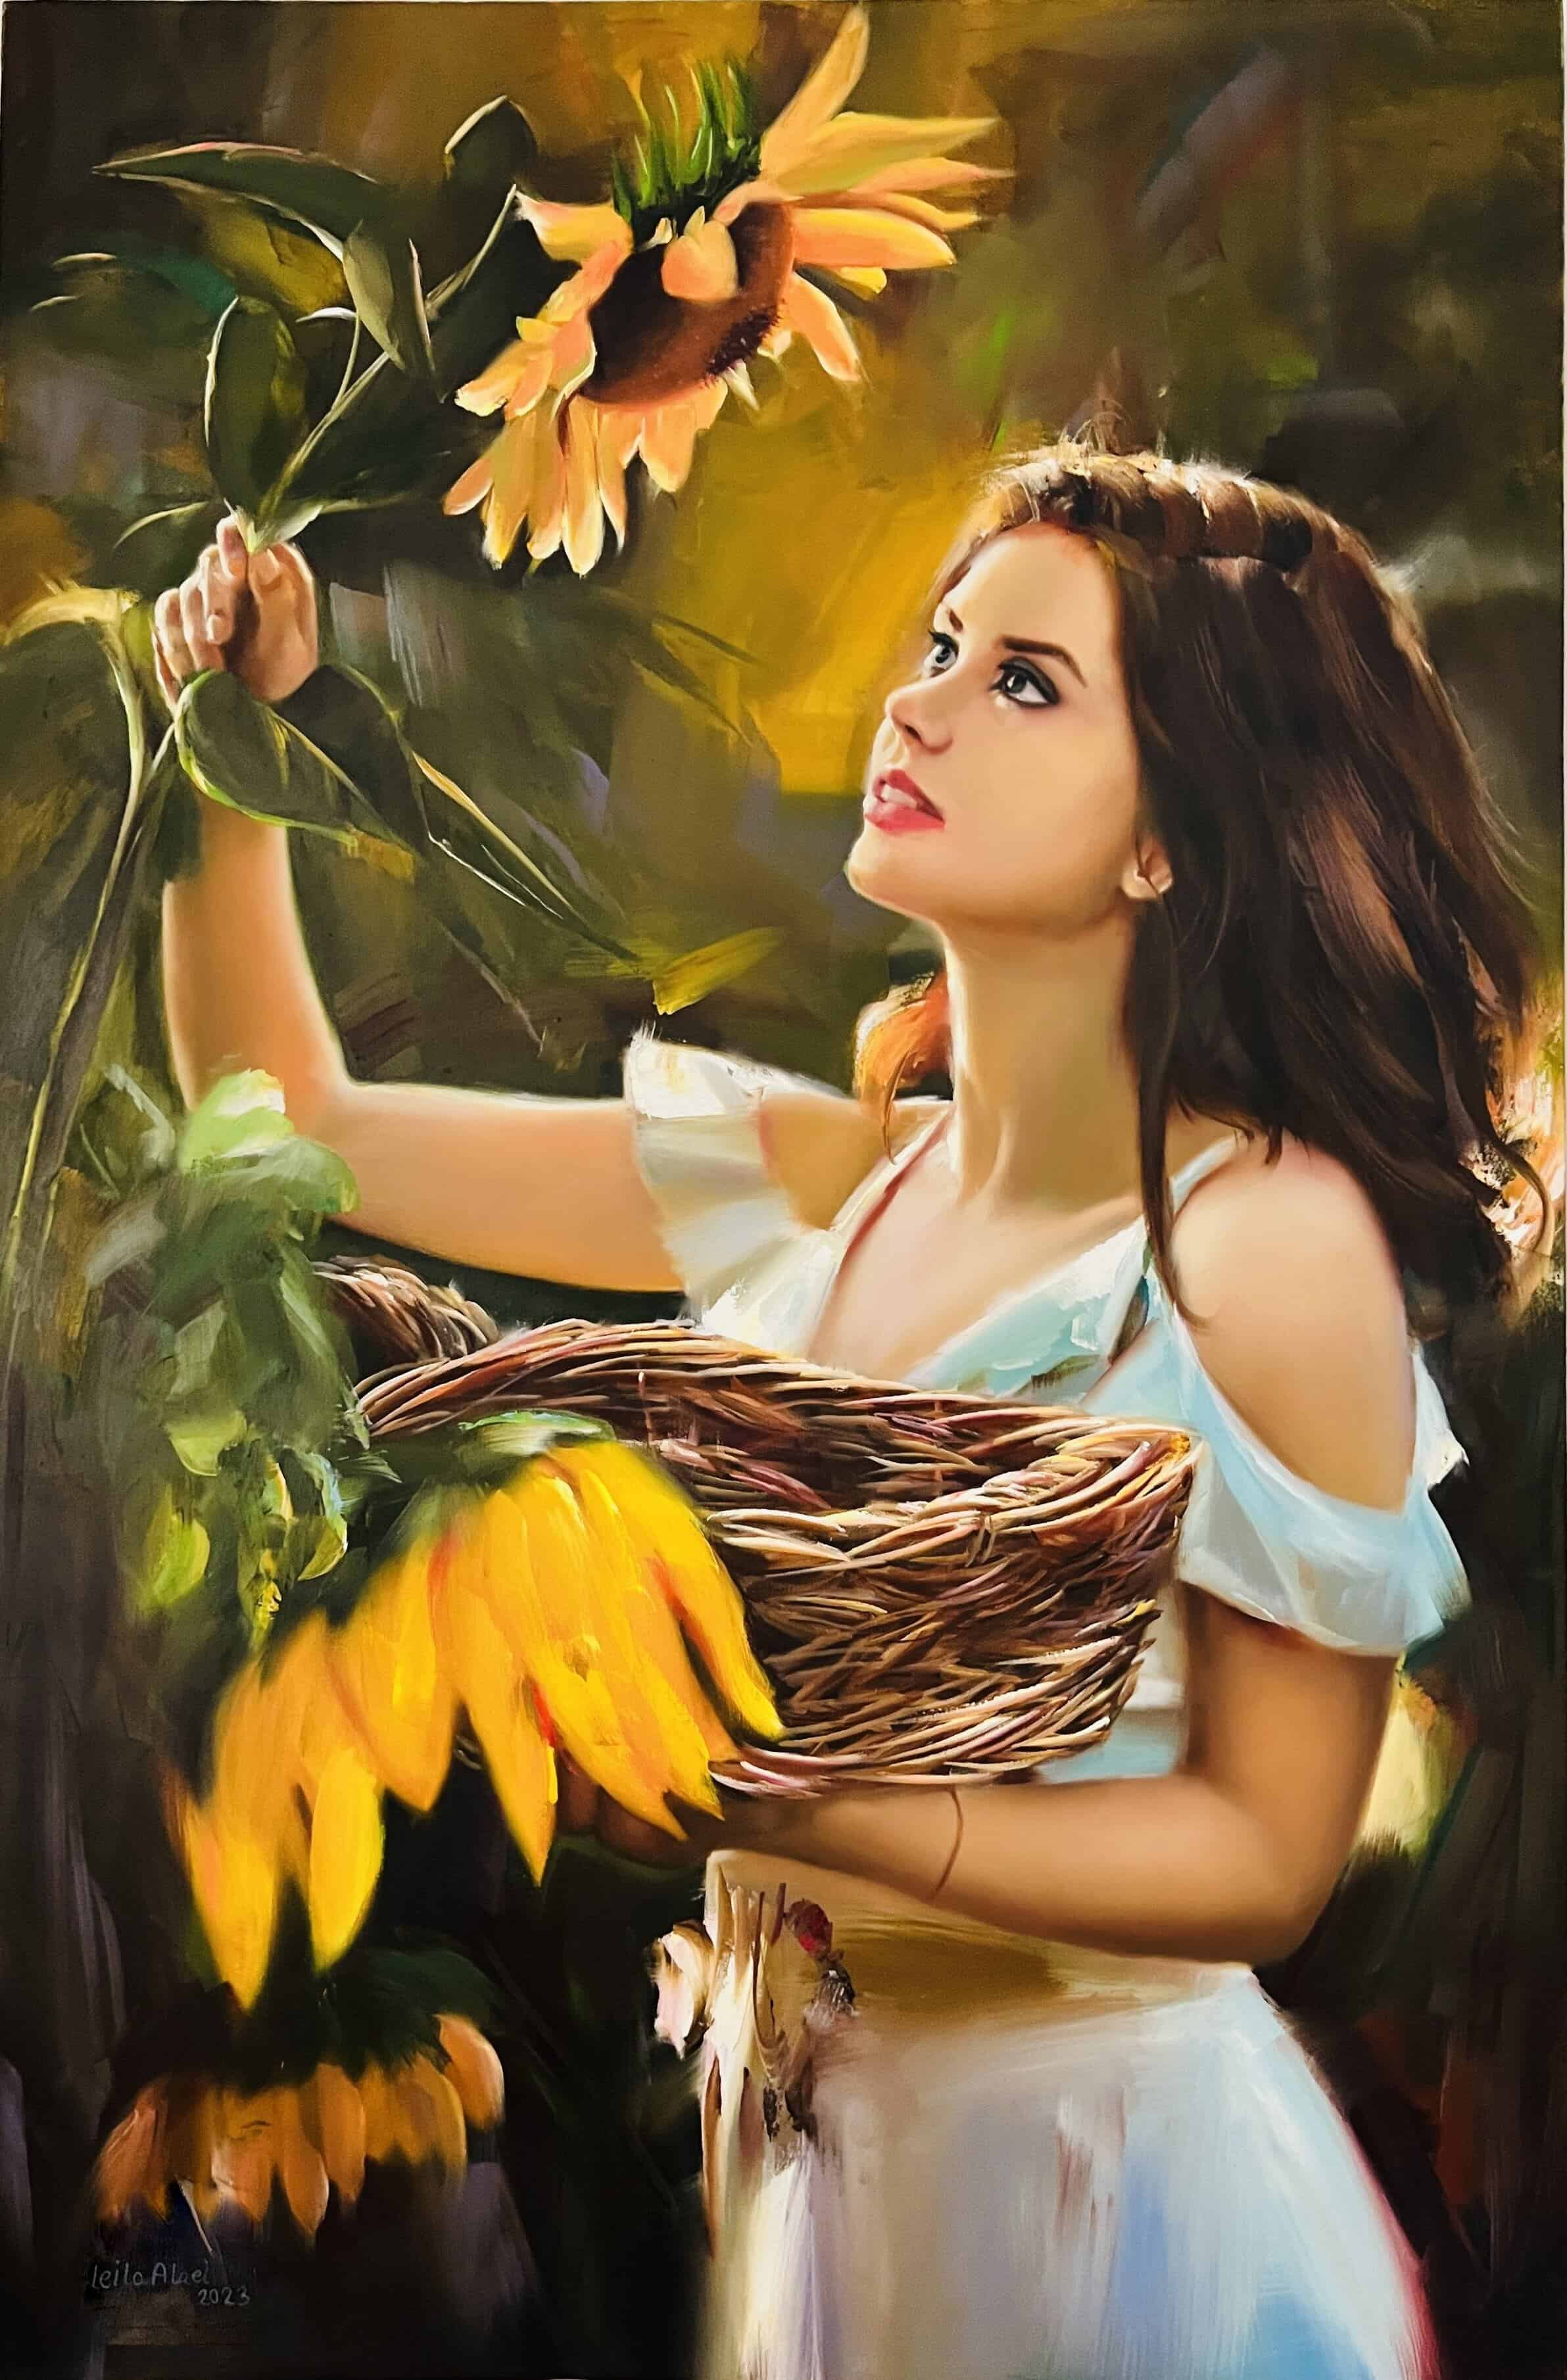 Contemporary Art. Title: I Love Sunflowers, Oil on Canvas, 48 x 32 in by Canadian Artist Leila Alaei.